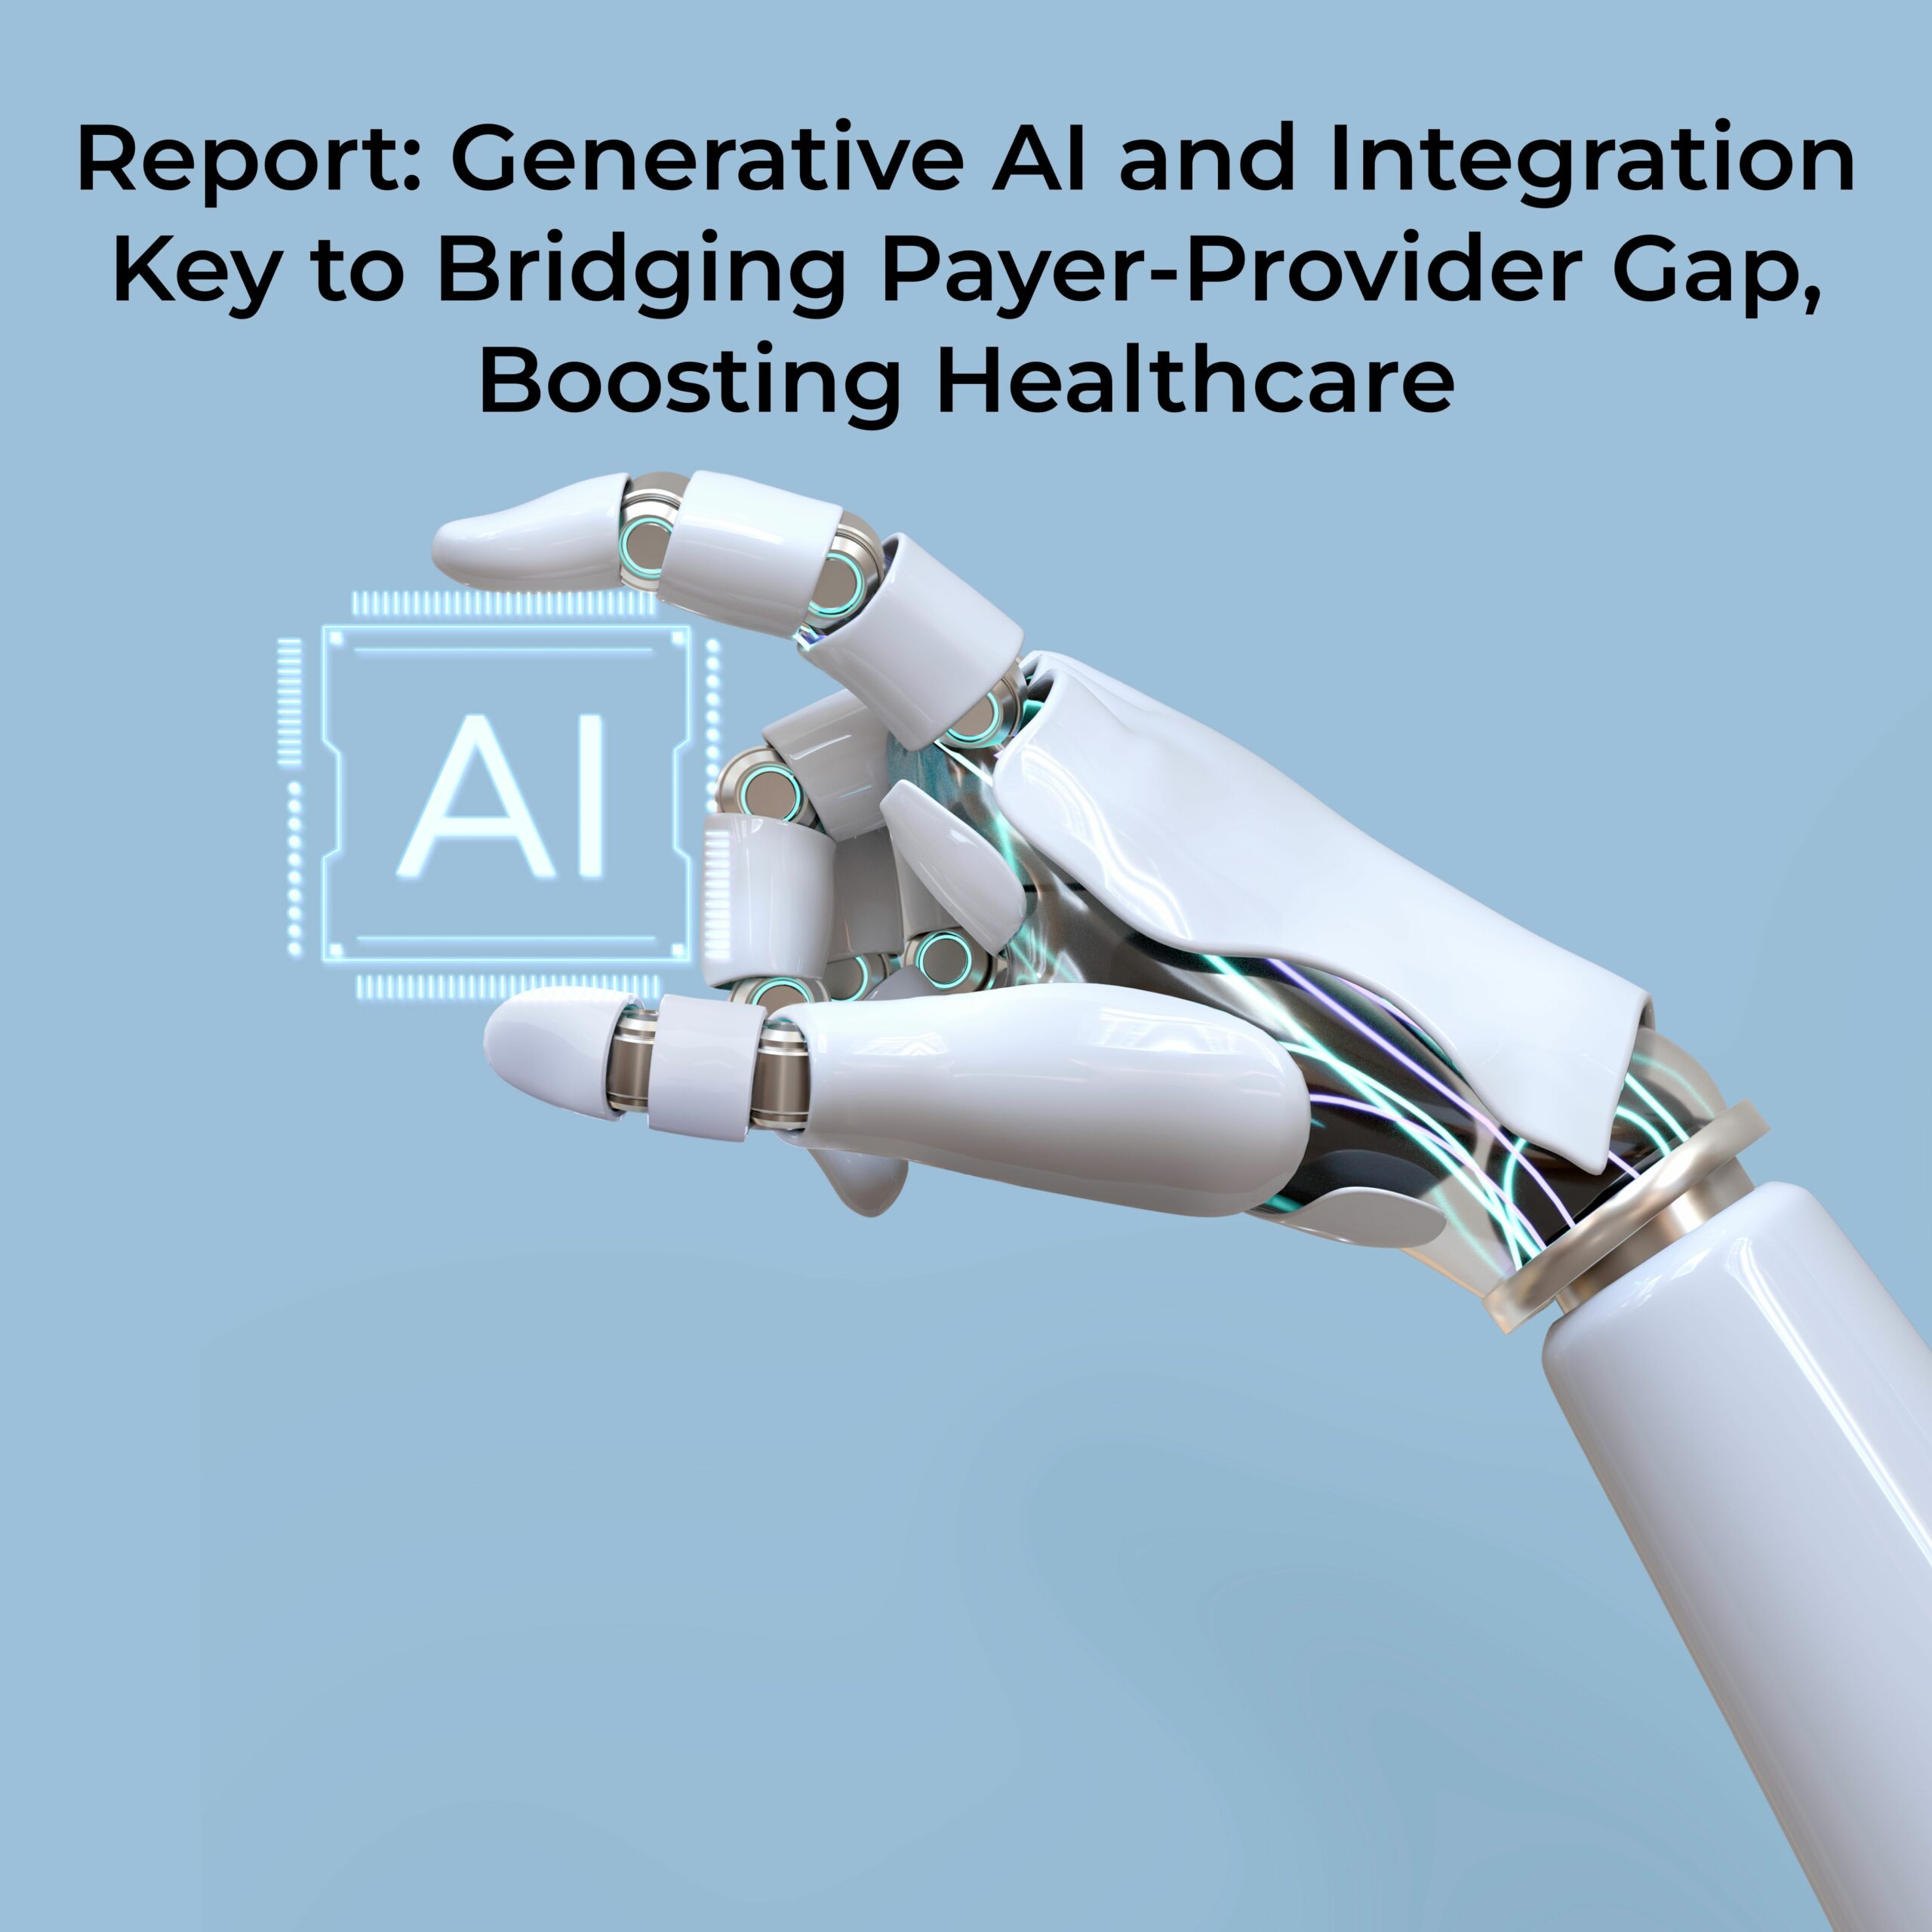 Report: Generative AI and Integration Key to Bridging Payer-Provider Gap